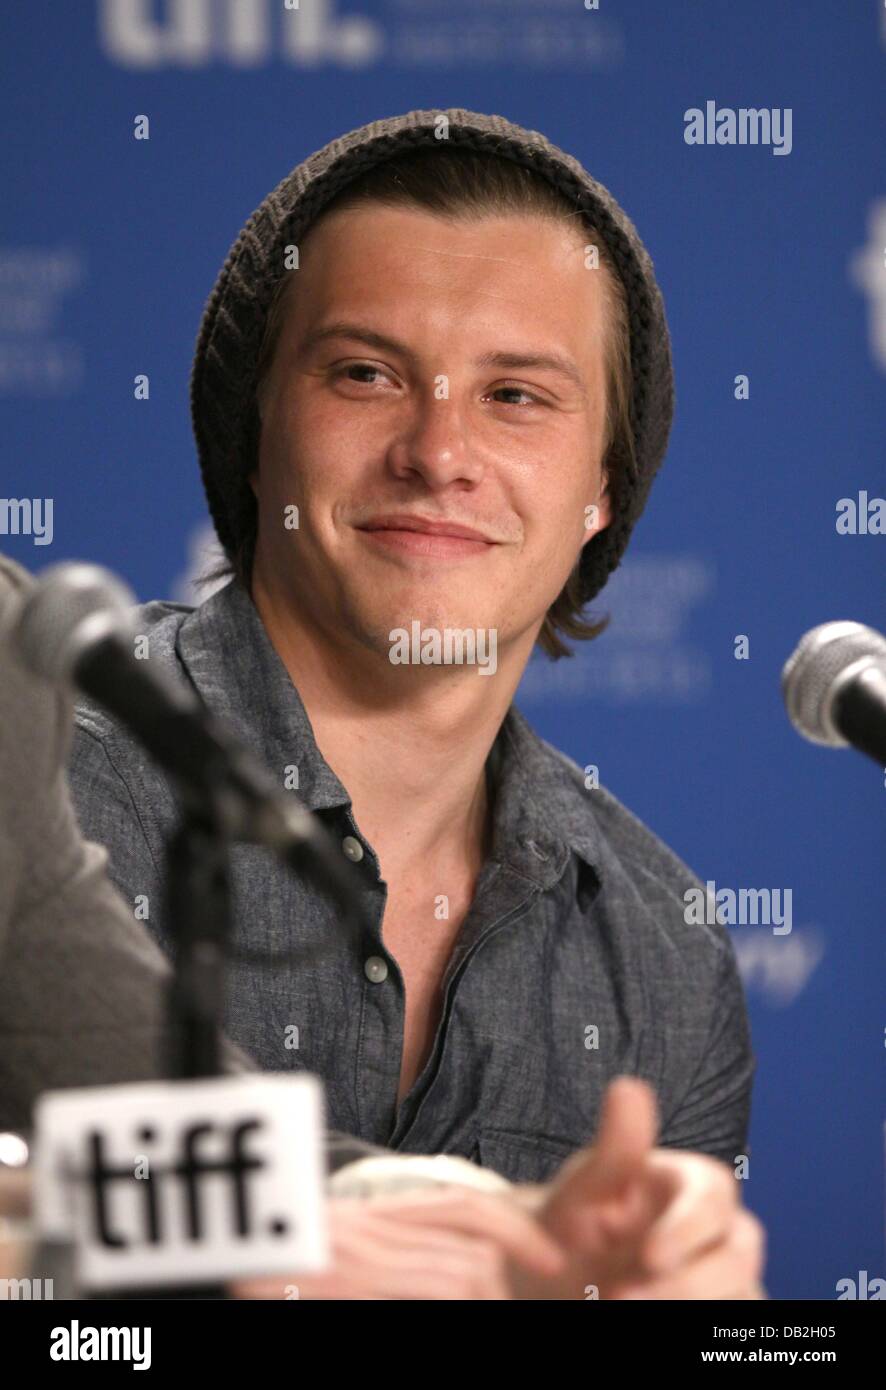 Australian actor Xavier Samuel attends the press conference of 'Anonymous' during the Toronto International Film Festival, TIFF, at Bell Lightbox in Toronto, Canada, on 11 September 2011. Photo: Hubert Boesl Stock Photo